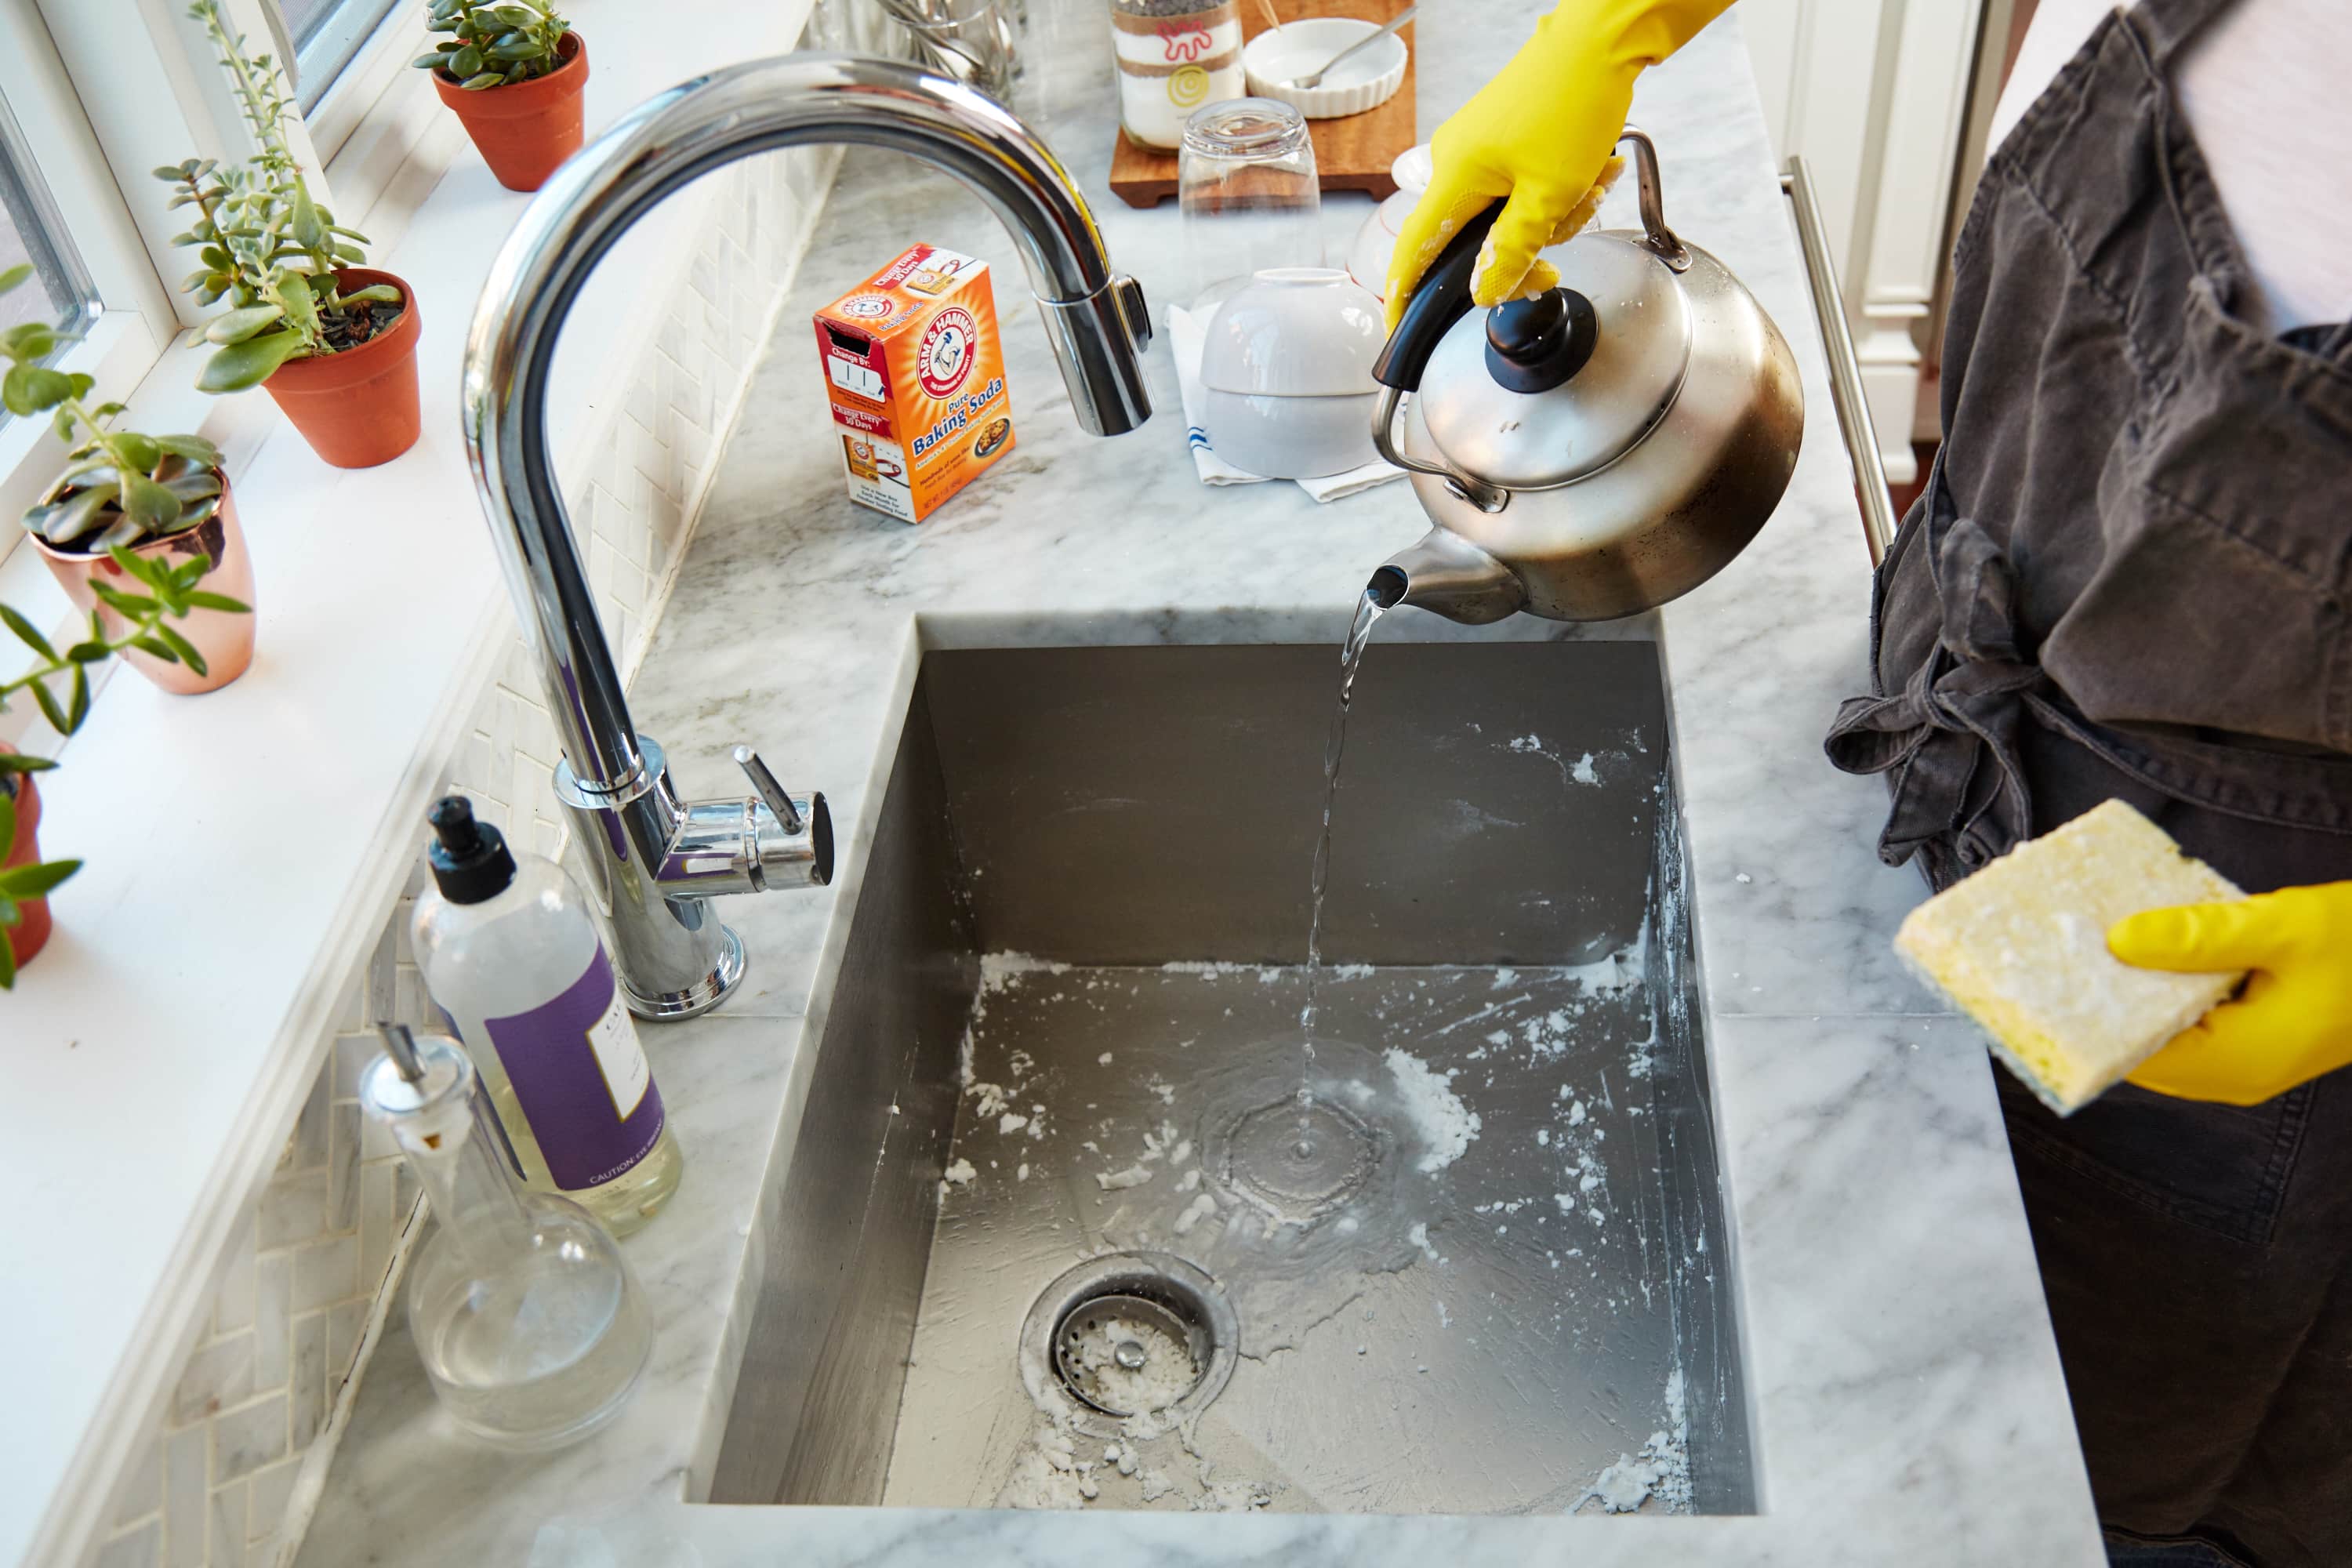 products to clean kitchen sink